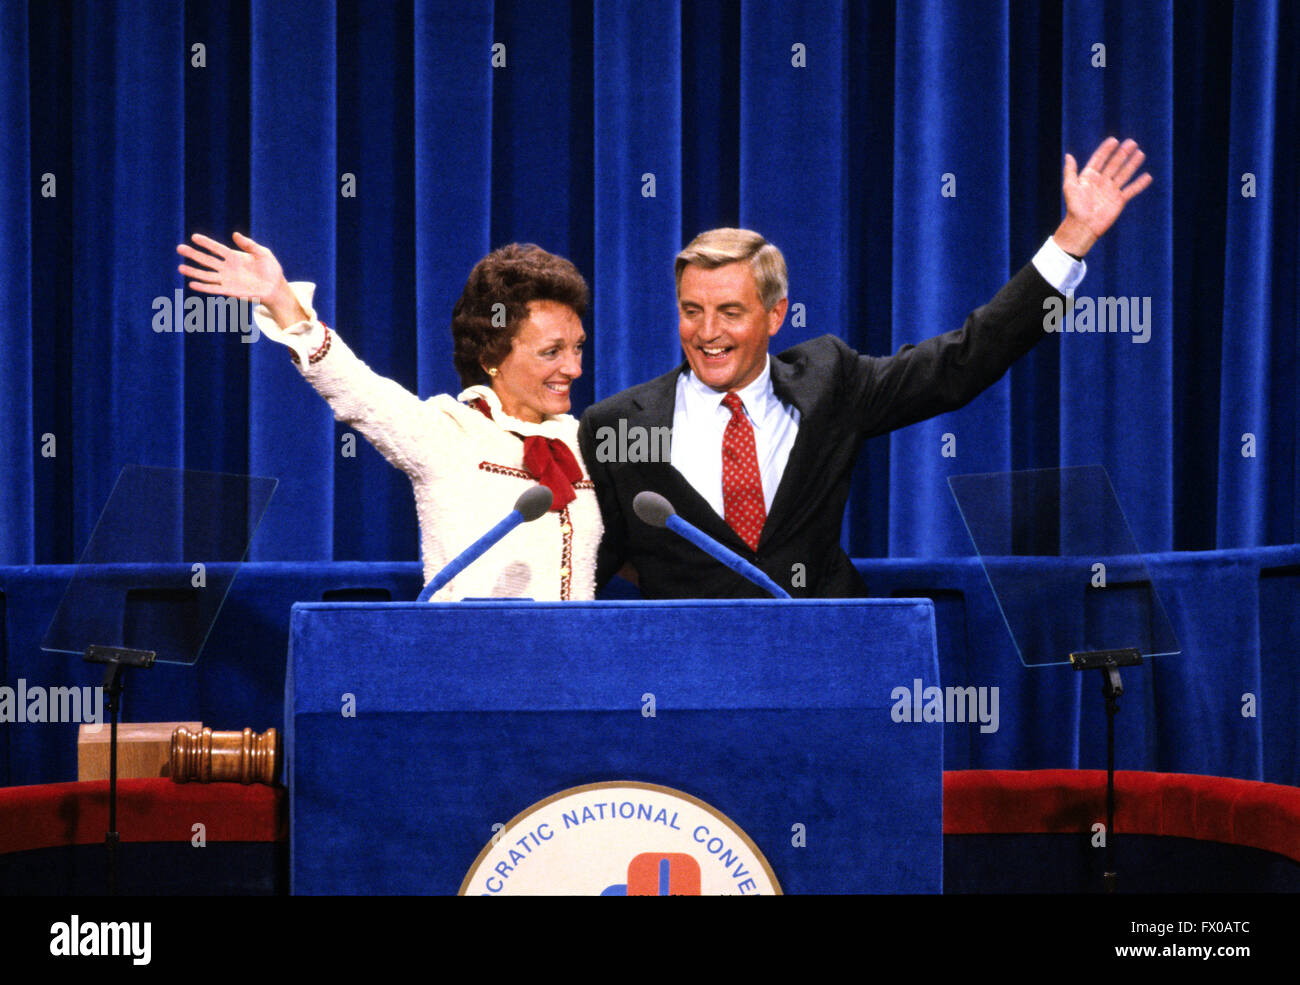 New York, New York, USA. 14th Aug, 1980. United States Vice President President Walter Mondale, right, and his wife, Joan, left, wave to the crowd after he delivered his speech accepting his party's nomination for reelection as Vice President of the United States at the 1980 Democratic National Convention in Madison Square Garden in New York, New York on August 13, 1980.Credit: Arnie Sachs/CNP © Arnie Sachs/CNP/ZUMA Wire/Alamy Live News Stock Photo